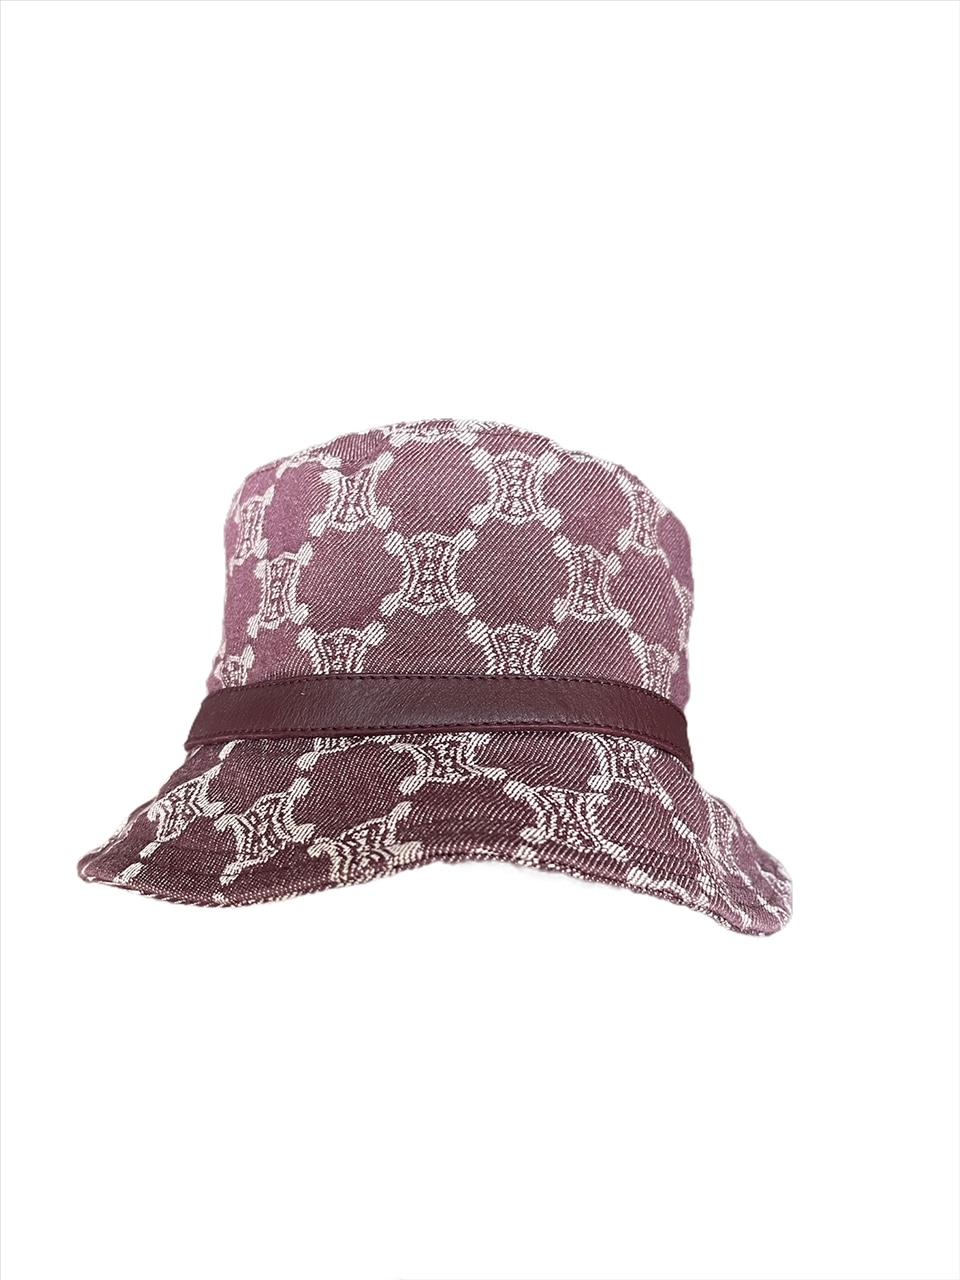 CELINE, Made in Italy, 00's.
Eggplant color denim bucket hat with Triomphe logo all-over with leather trimming. 
Size S. Diameter 52cm / 20 inches